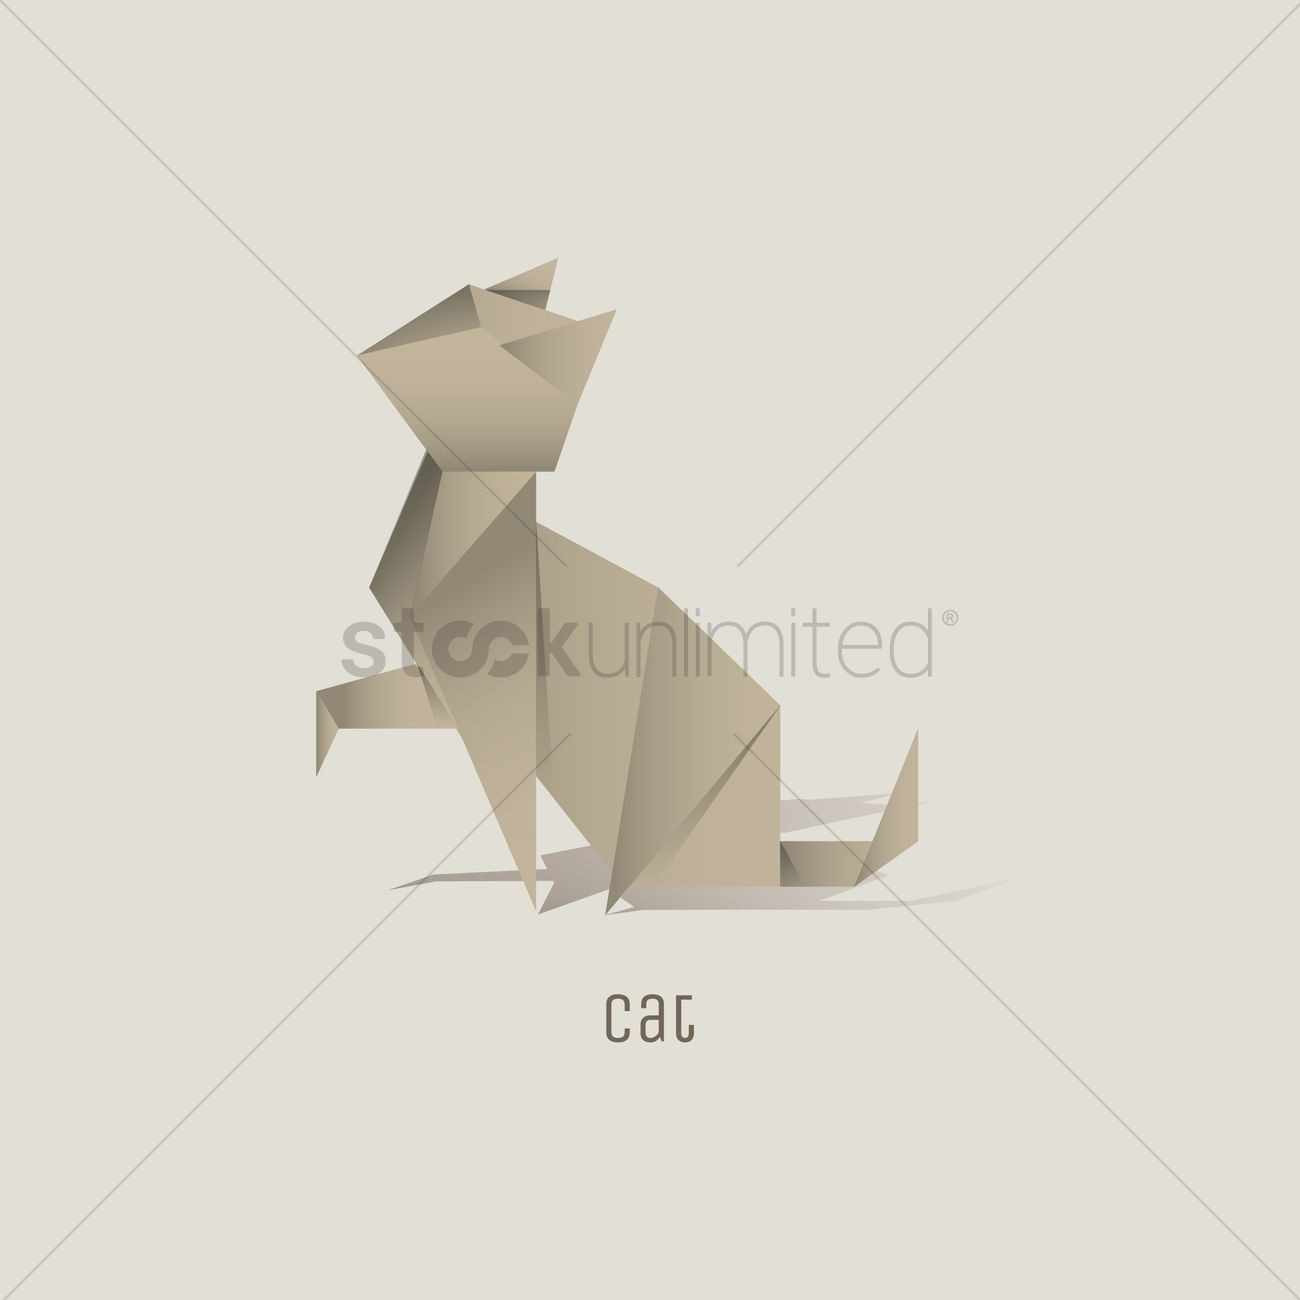 Origami Cat How To Origami Cat Vector Image 1817845 Stockunlimited